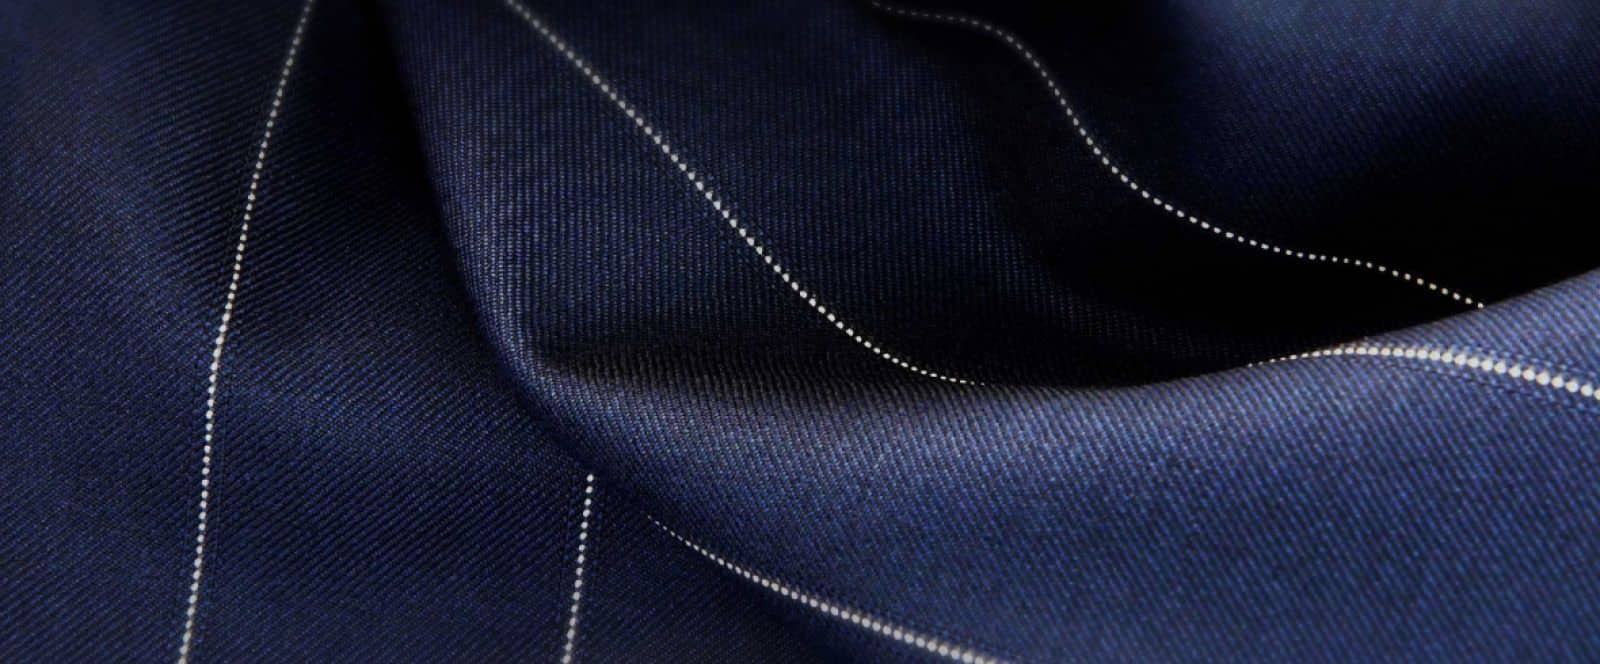 NEW*TOP QUALITY ENGLISH SUPER 120s PINSTRIPED WOOL BLEND COT/SUITING FABRIC 58"w 